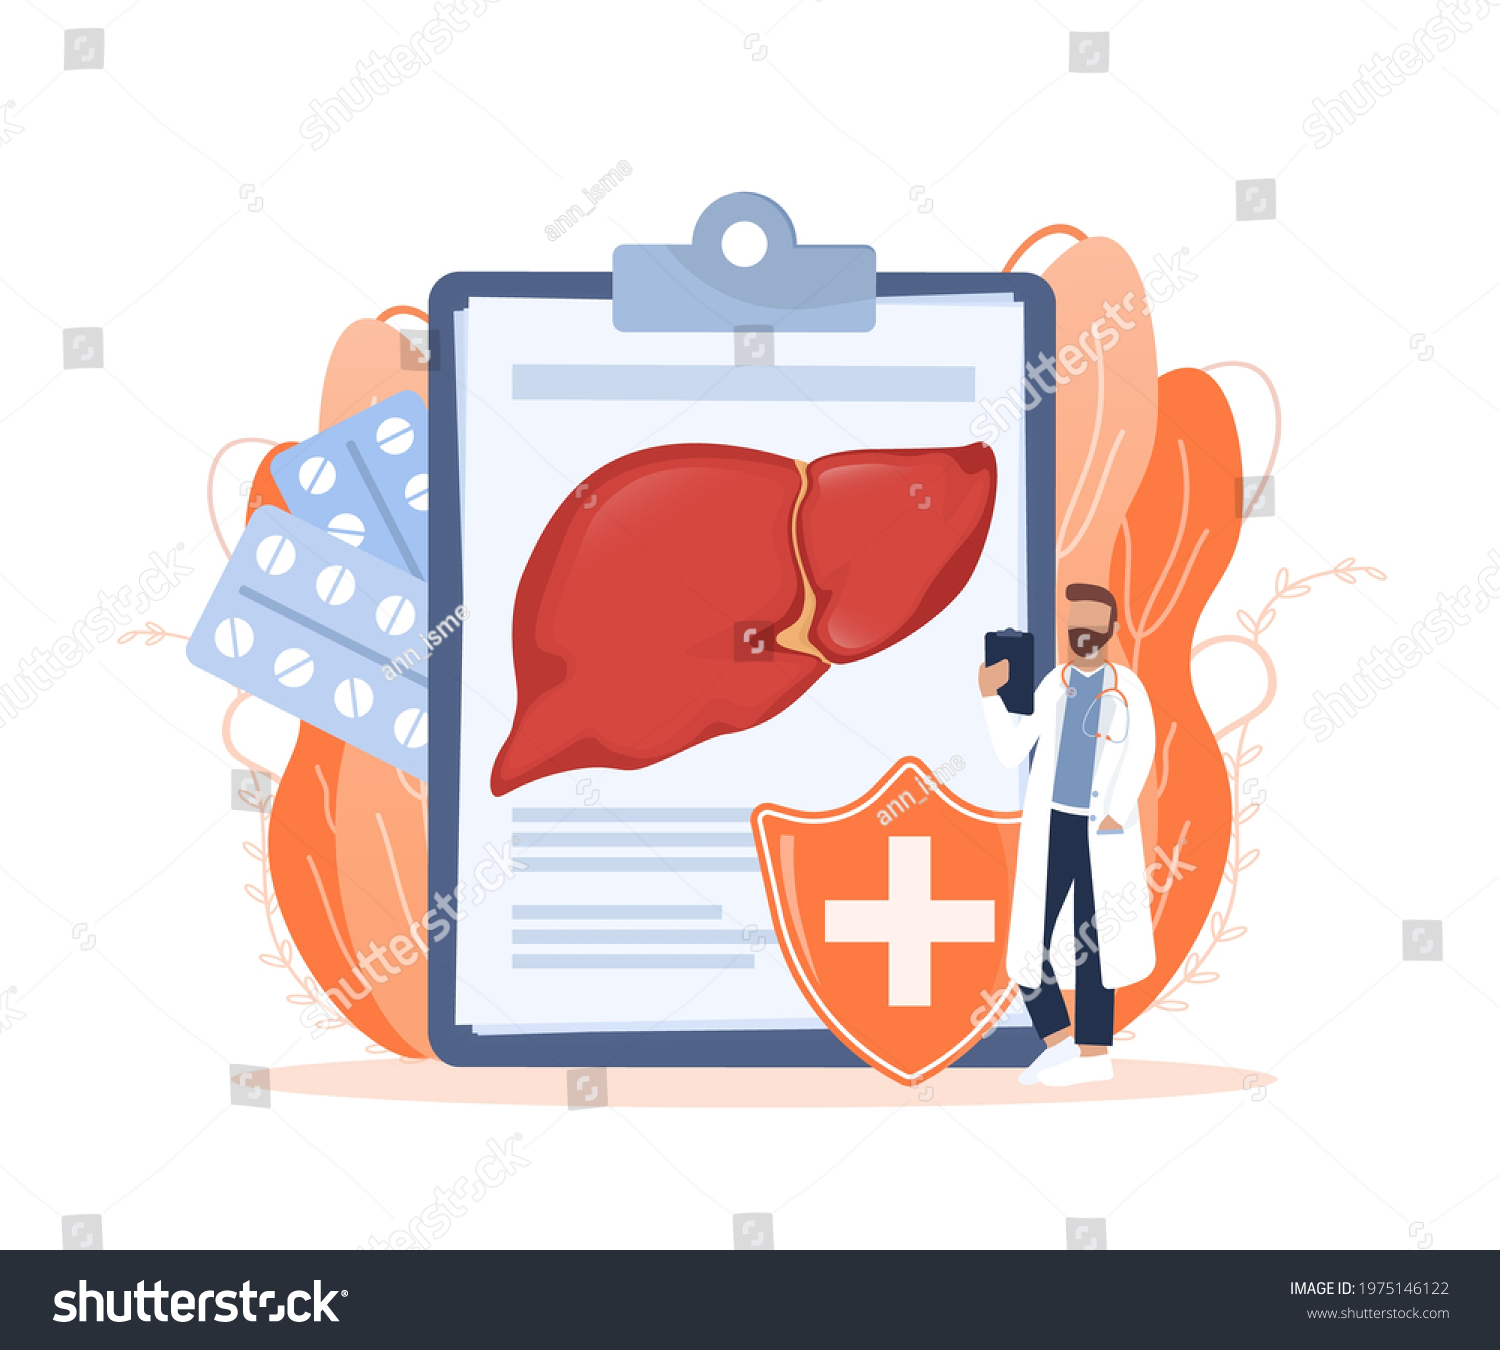 SVG of Flat illustration with liver on white background for medical design. Characters in cartoon style. Vector hepatic system organ, digestive gallbladder organ. svg